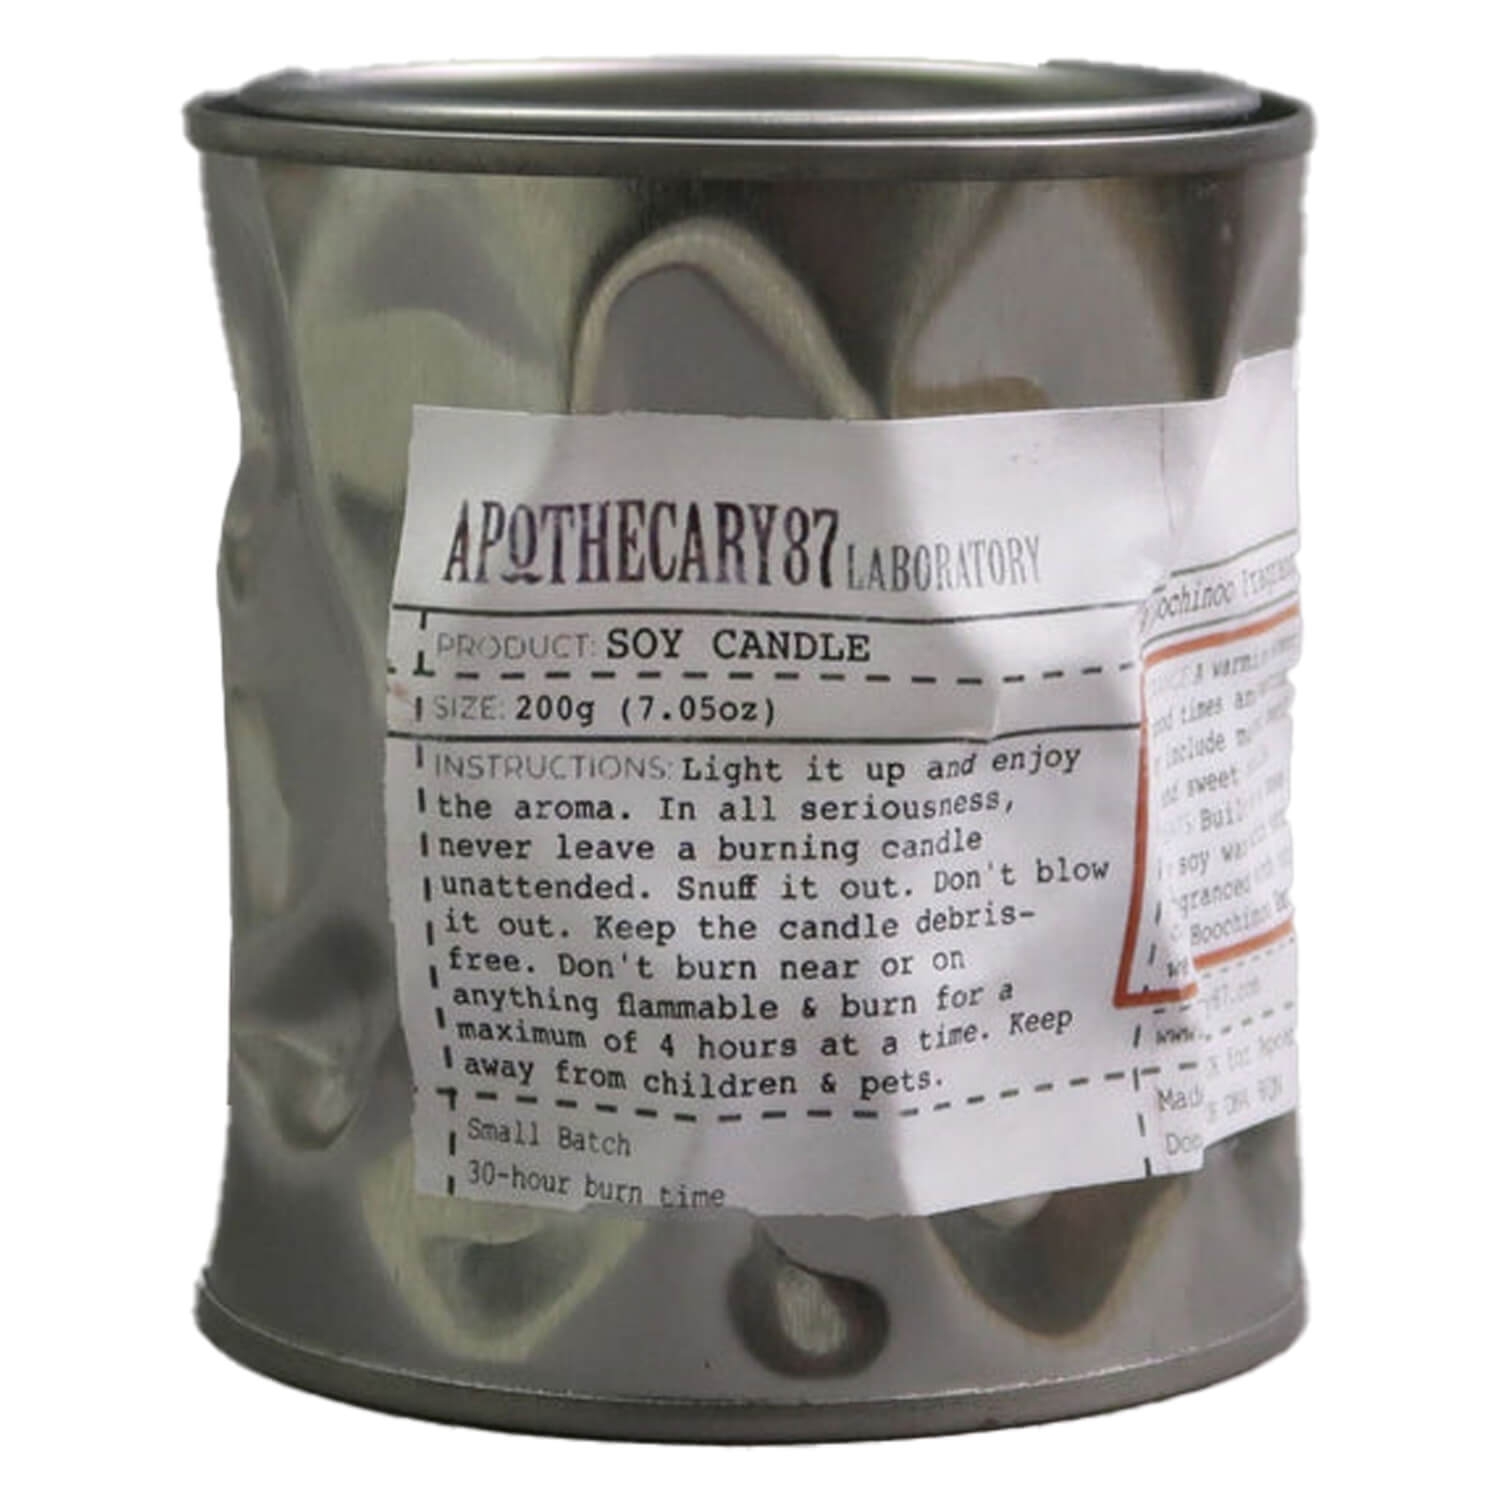 Product image from Apothecary87 Soy Candle A Hoochinoo Fragrance